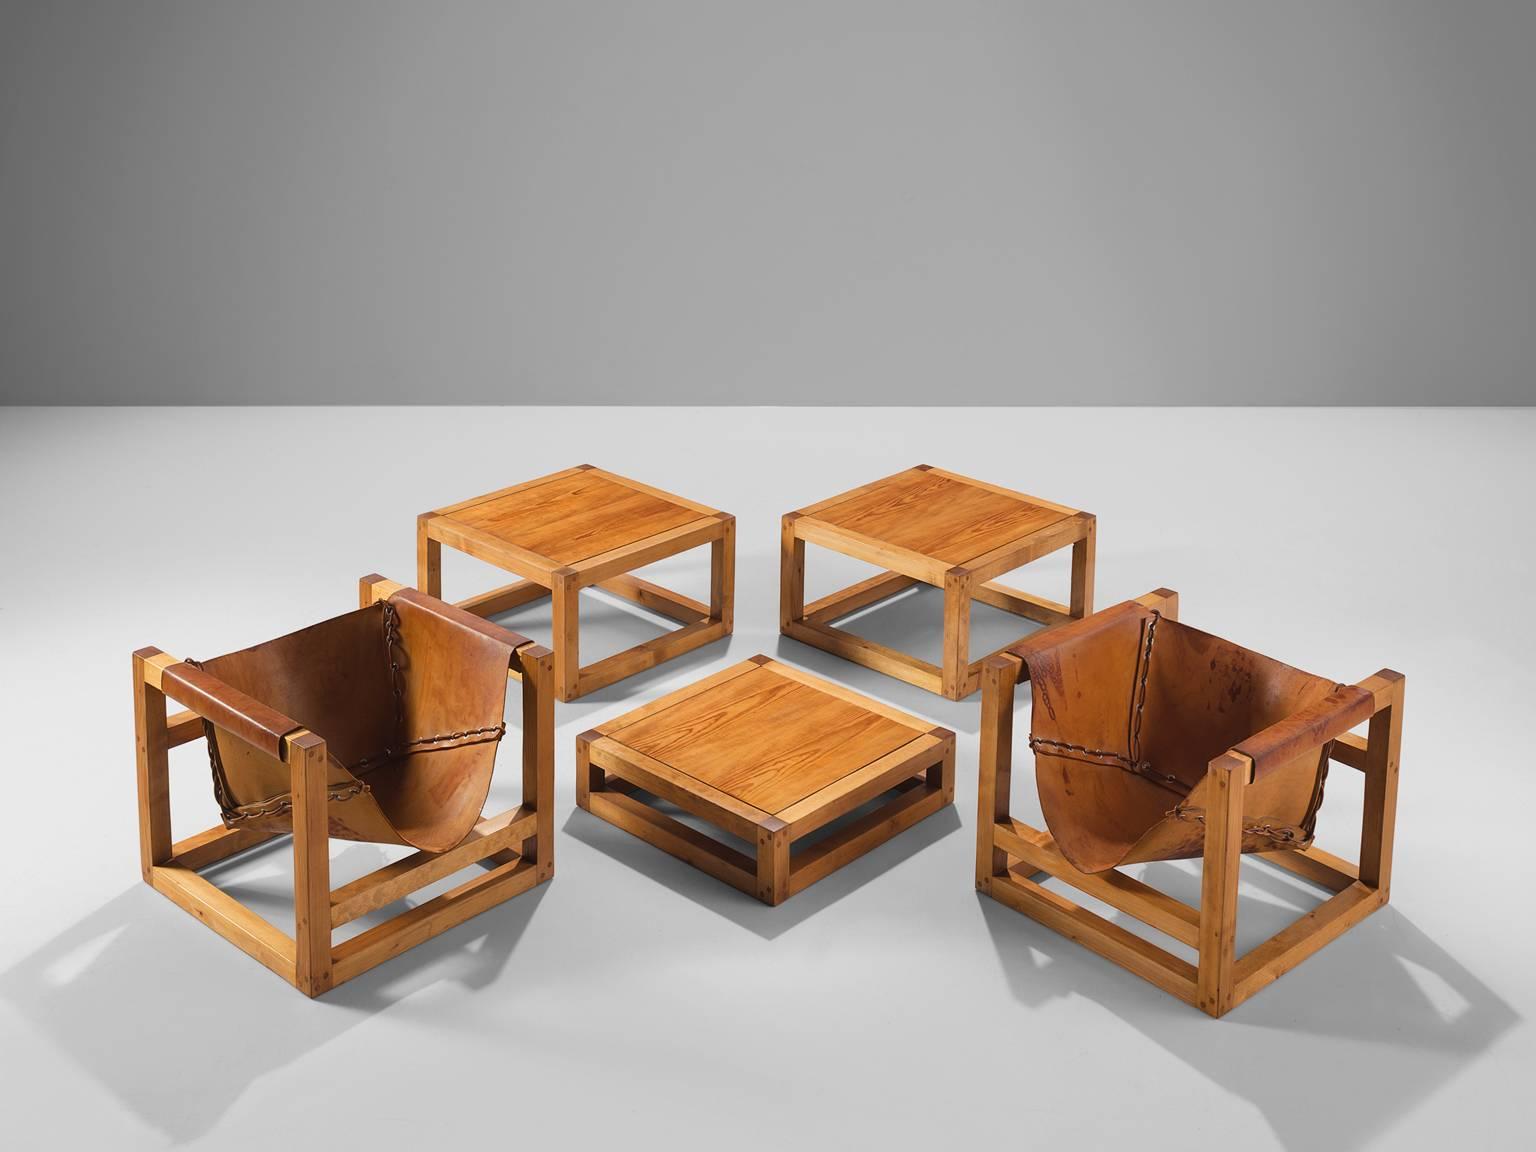 Heinz Witthoeft for Witthoeft Stuttgart, armchairs model Tail 4, leather, pine, Germany, 1959
 
The cubist lounge chairs by Heinz Witthoeft are part of a larger architectural vision by designer Heinz Witthoeft. The idea Witthoeft had in mind was